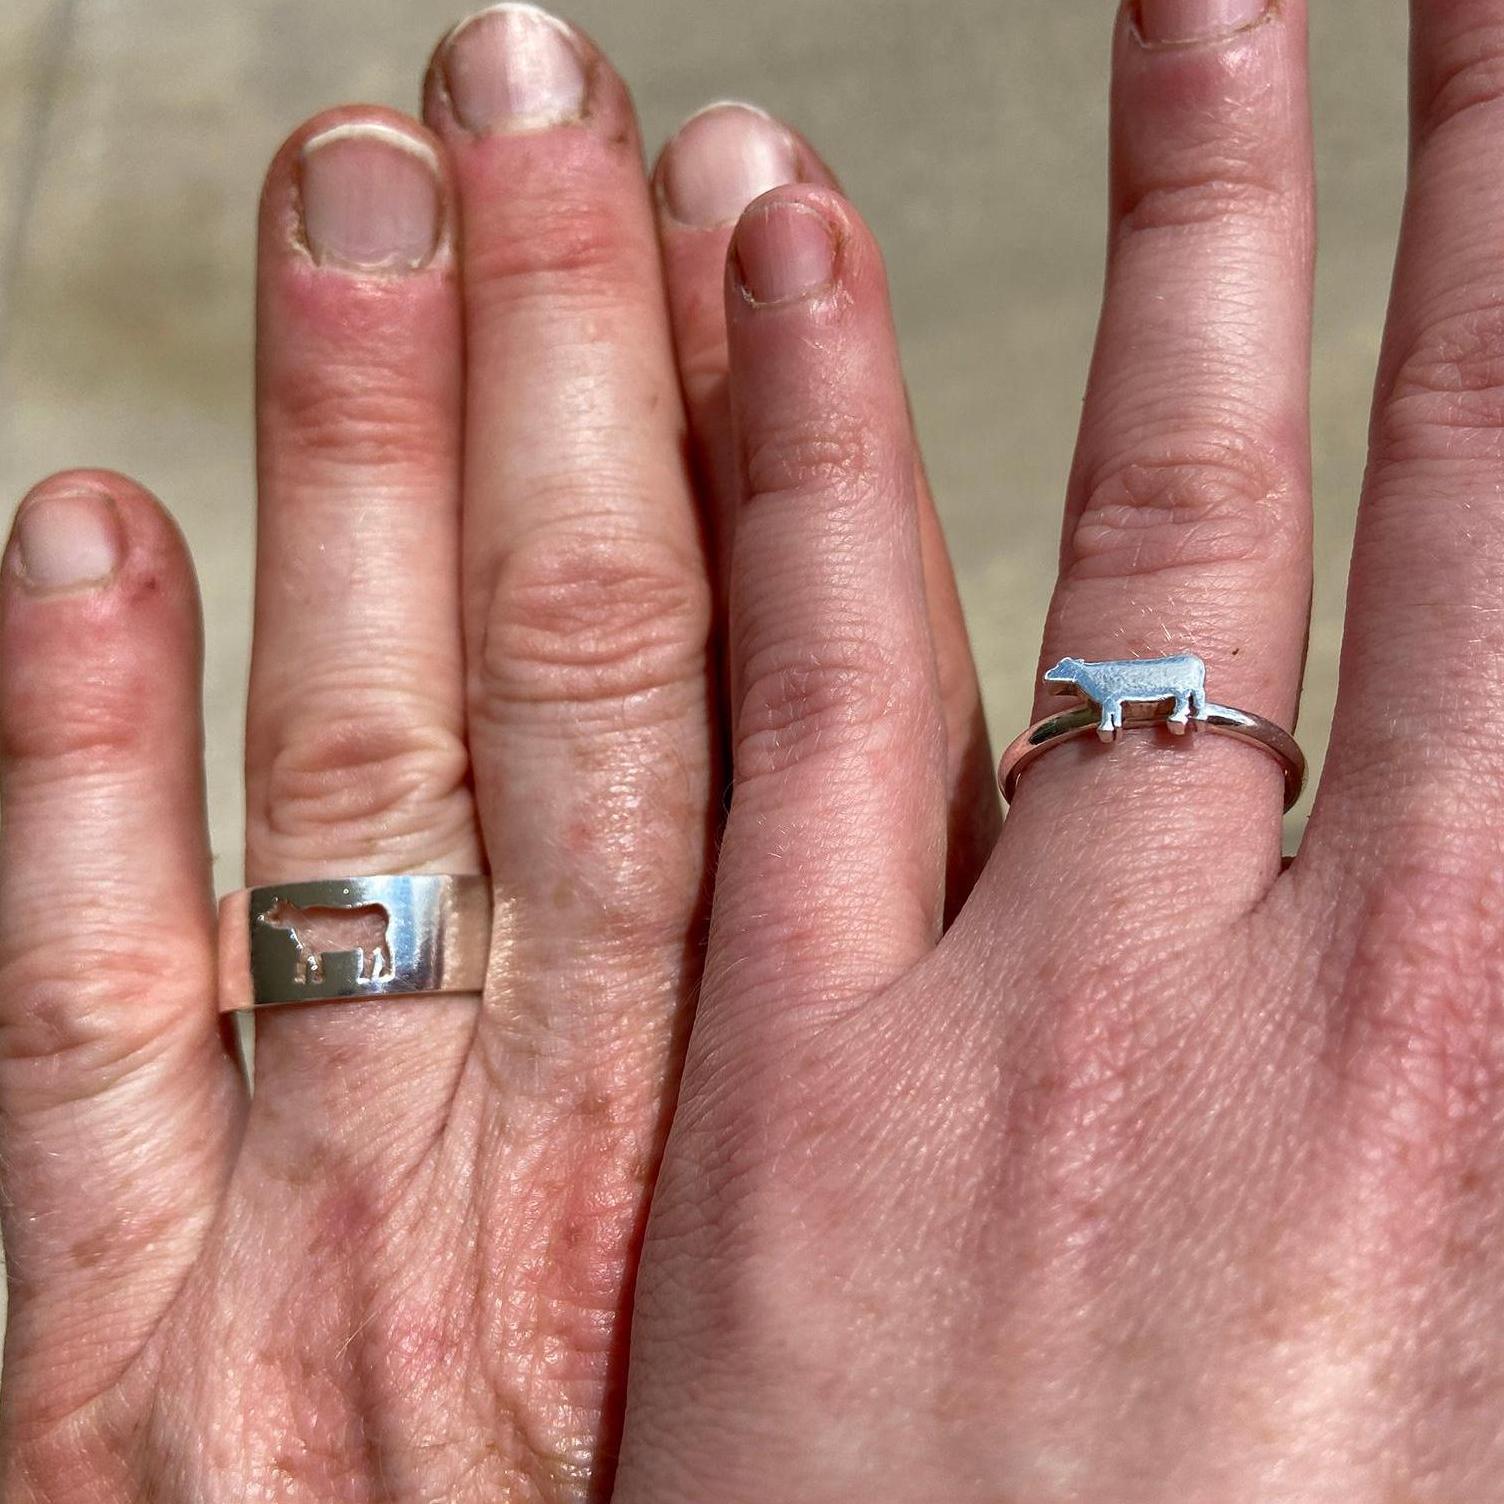 These are our engagement rings.  Fitting since we were brought together by cows.